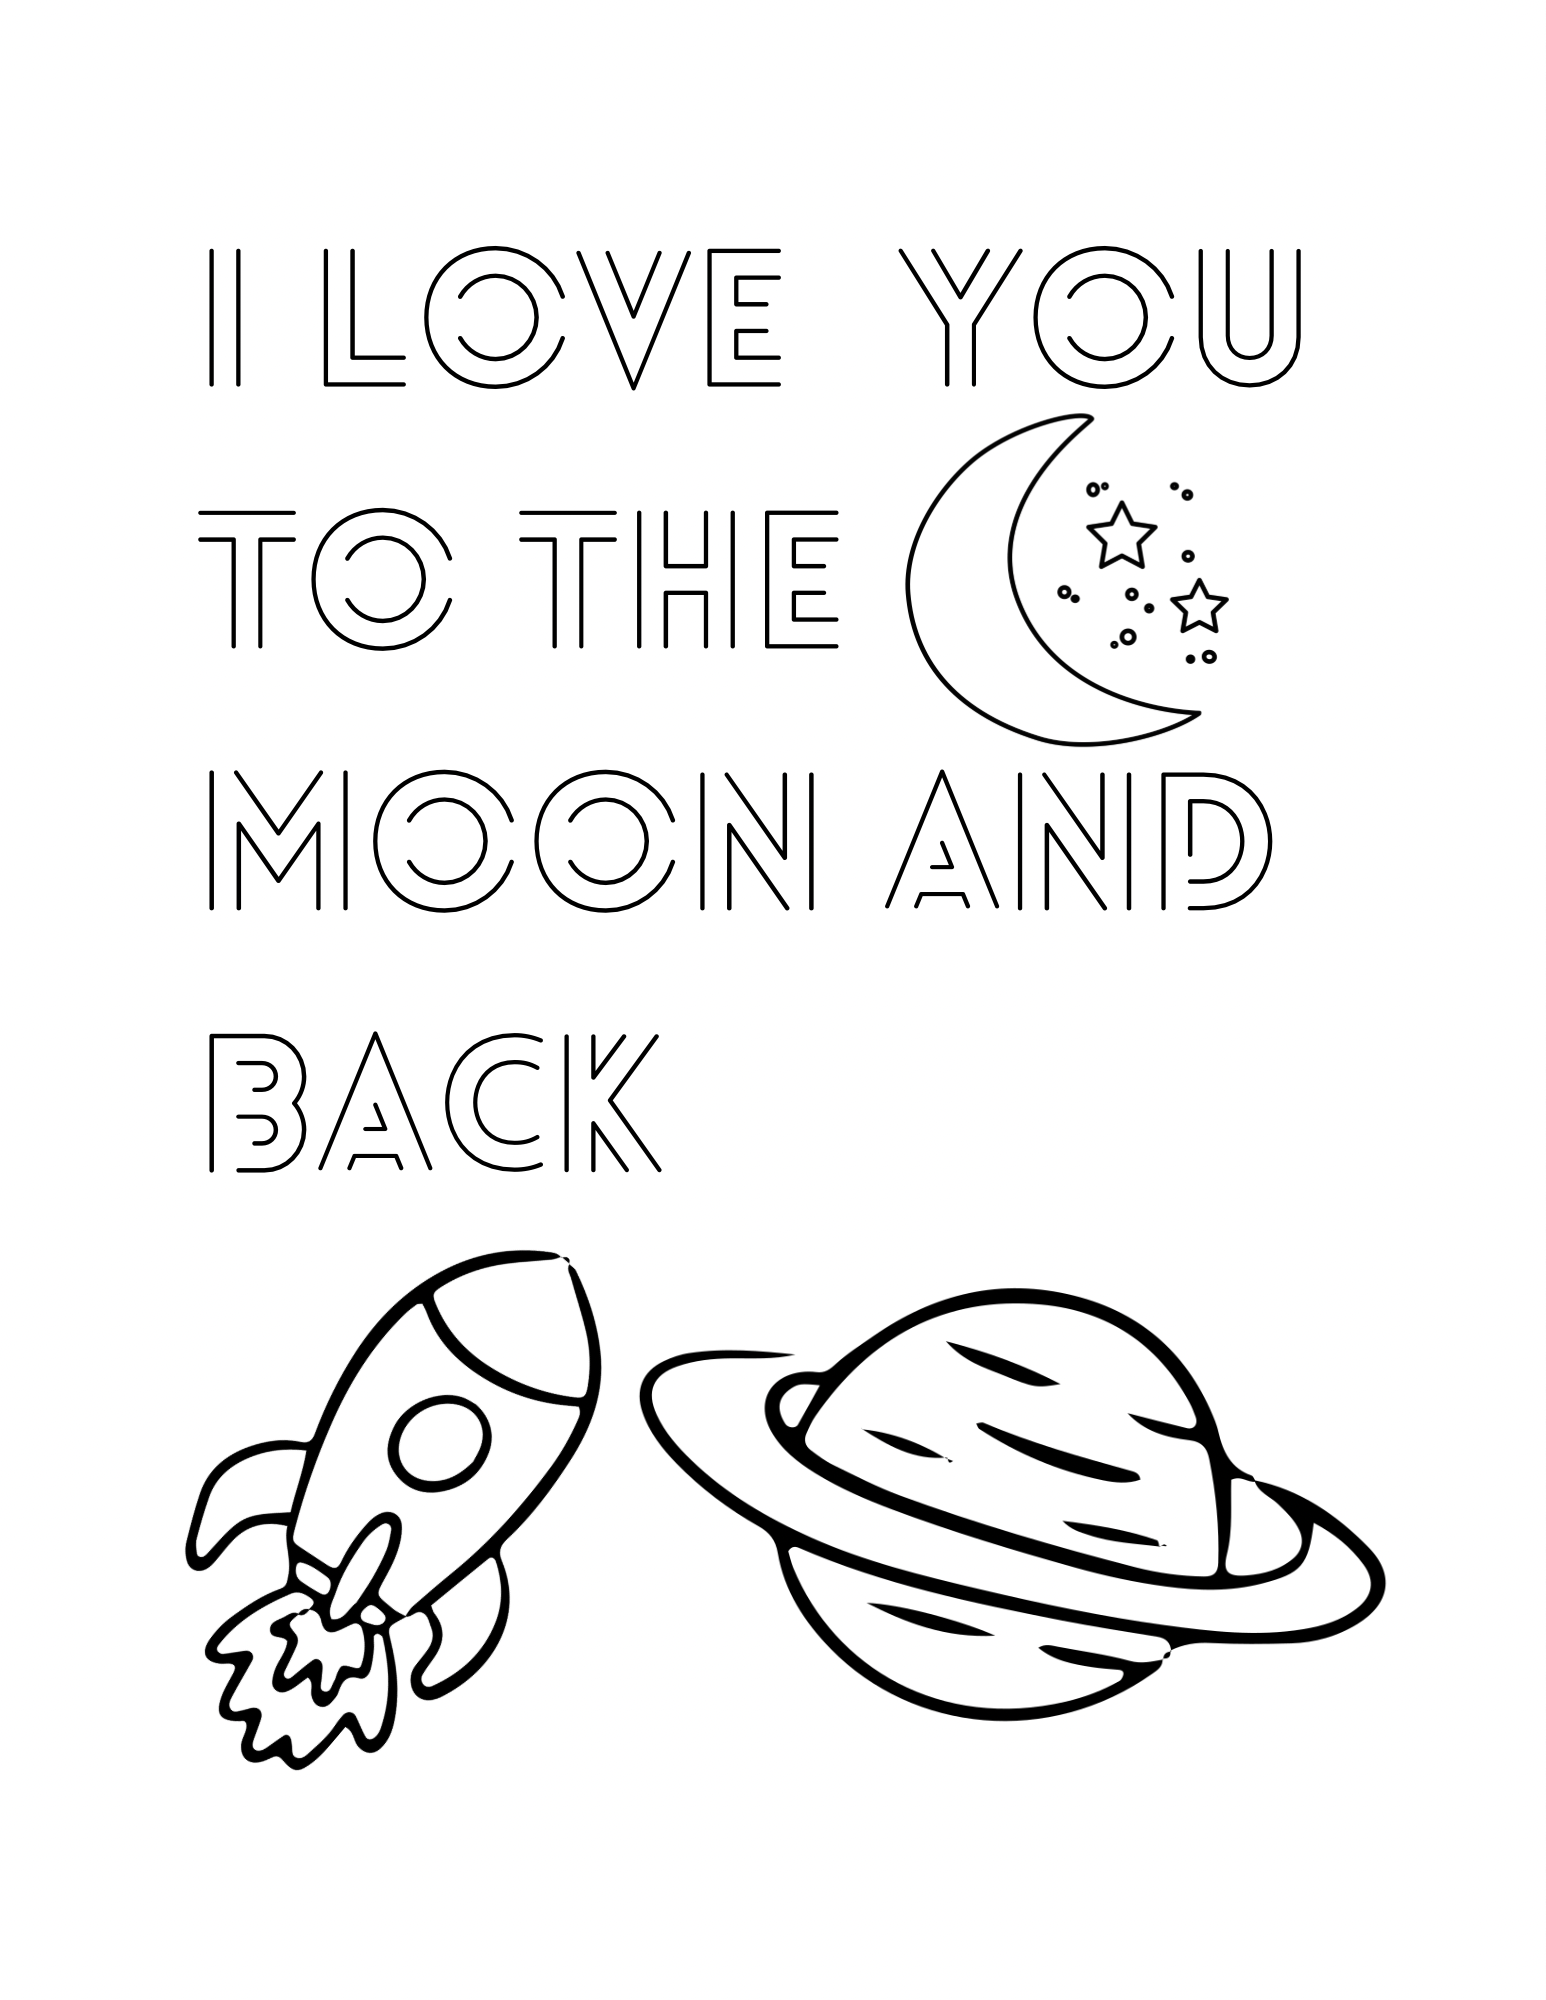 I Love You To The Moon And Back Coloring Sheet (Download Here)